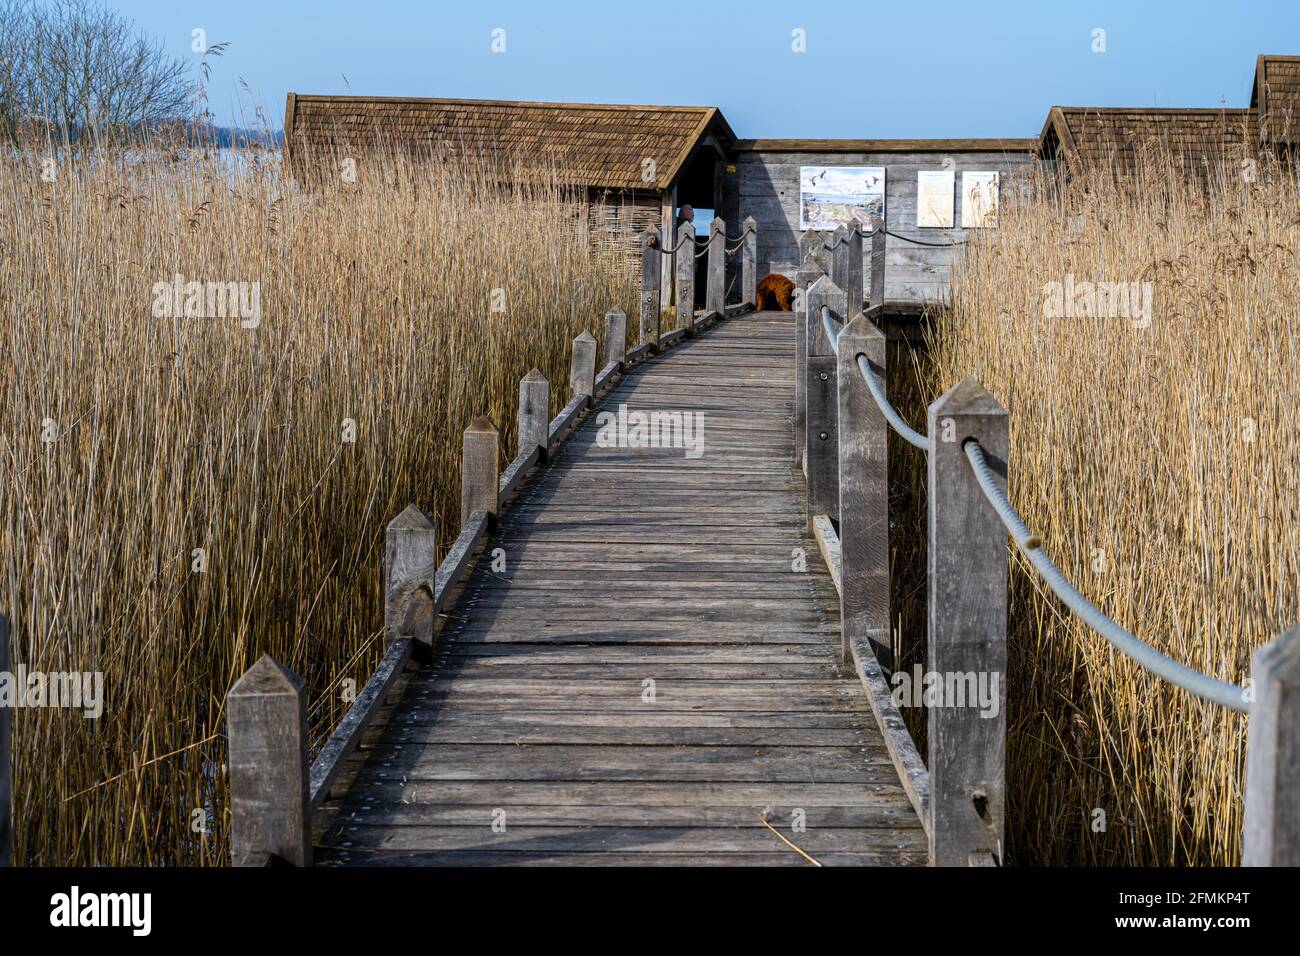 A board walk through tall grass in a marshy wetland. Picture from Lund, southern Sweden Stock Photo